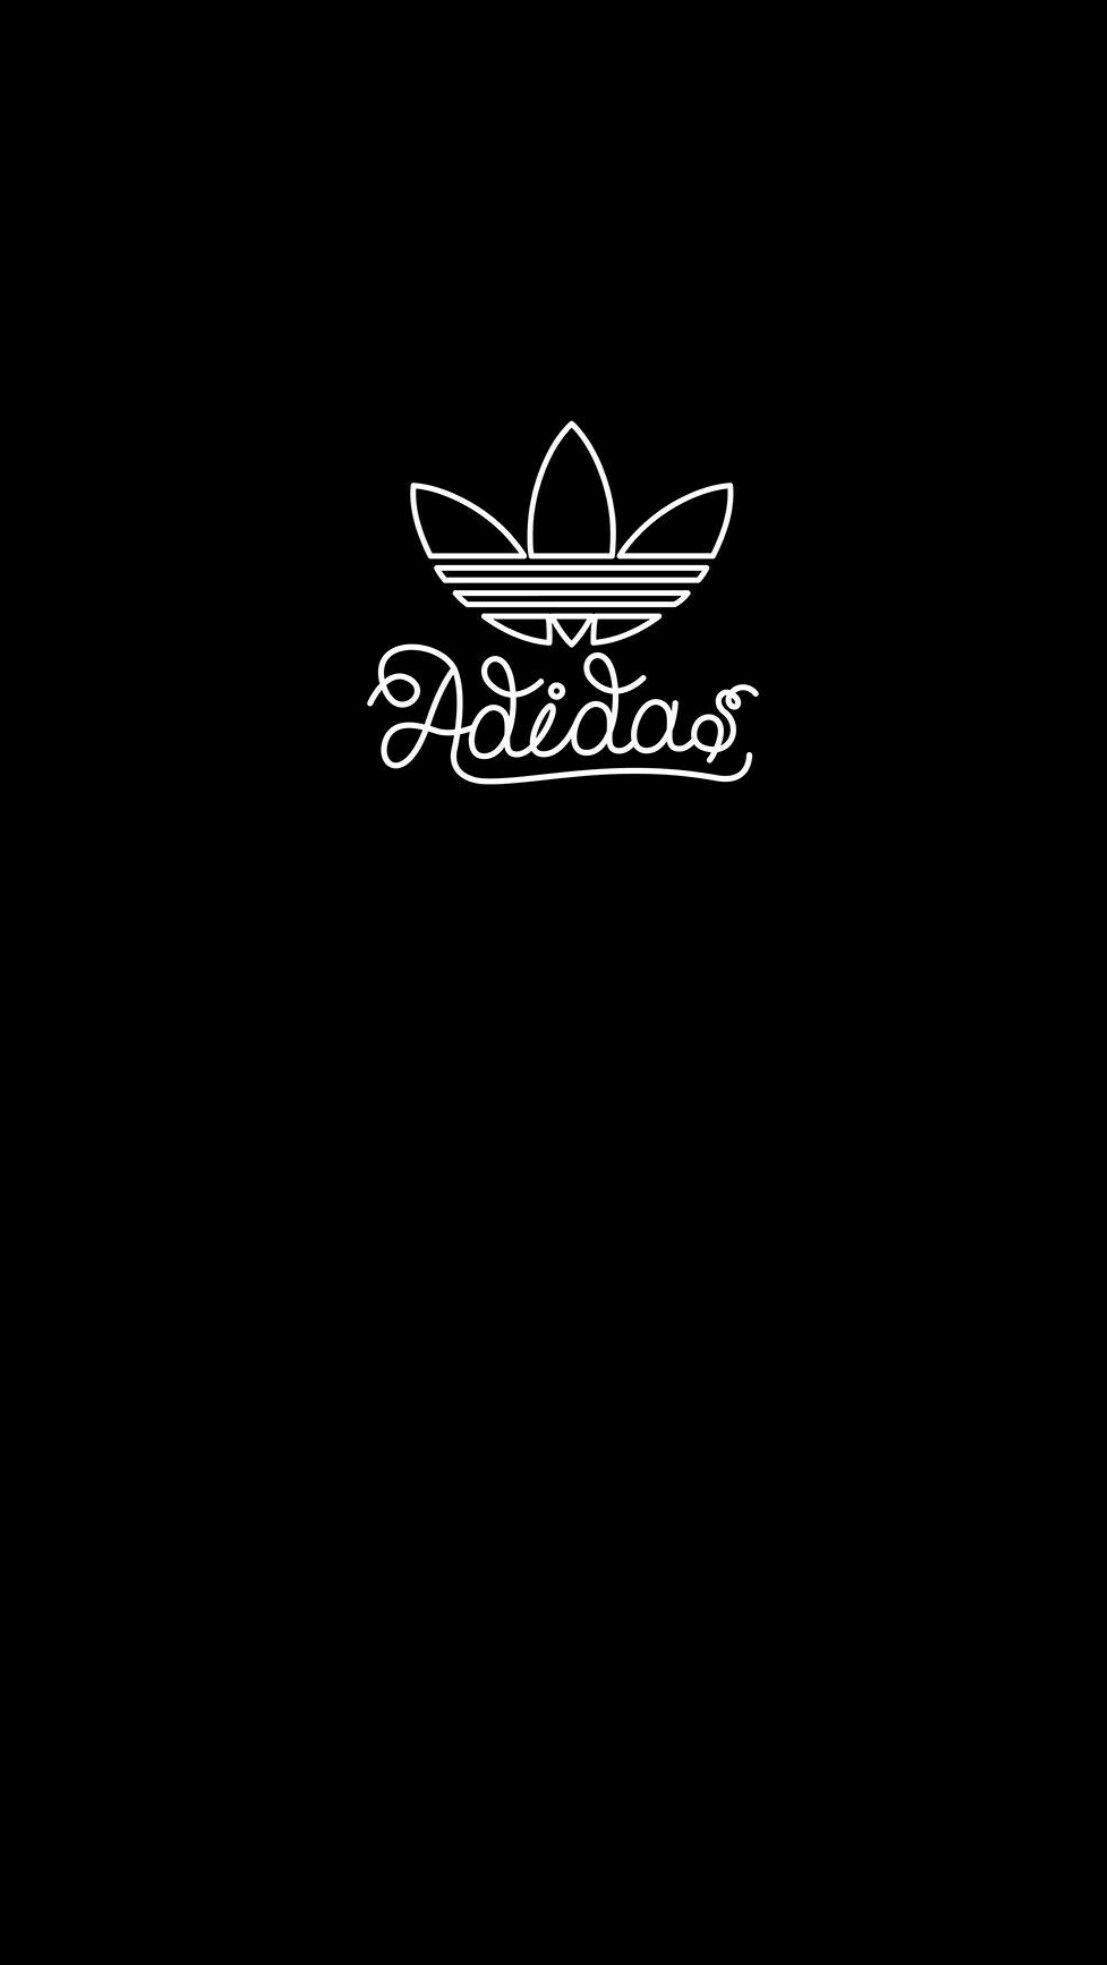 Free Download Adidas White Aesthetic Wallpapers Top Adidas White 1107x1965 For Your Desktop Mobile Tablet Explore 33 Adidas Aesthetic Wallpaper Adidas Aesthetic Wallpaper Adidas Wallpaper Aesthetic Wallpaper